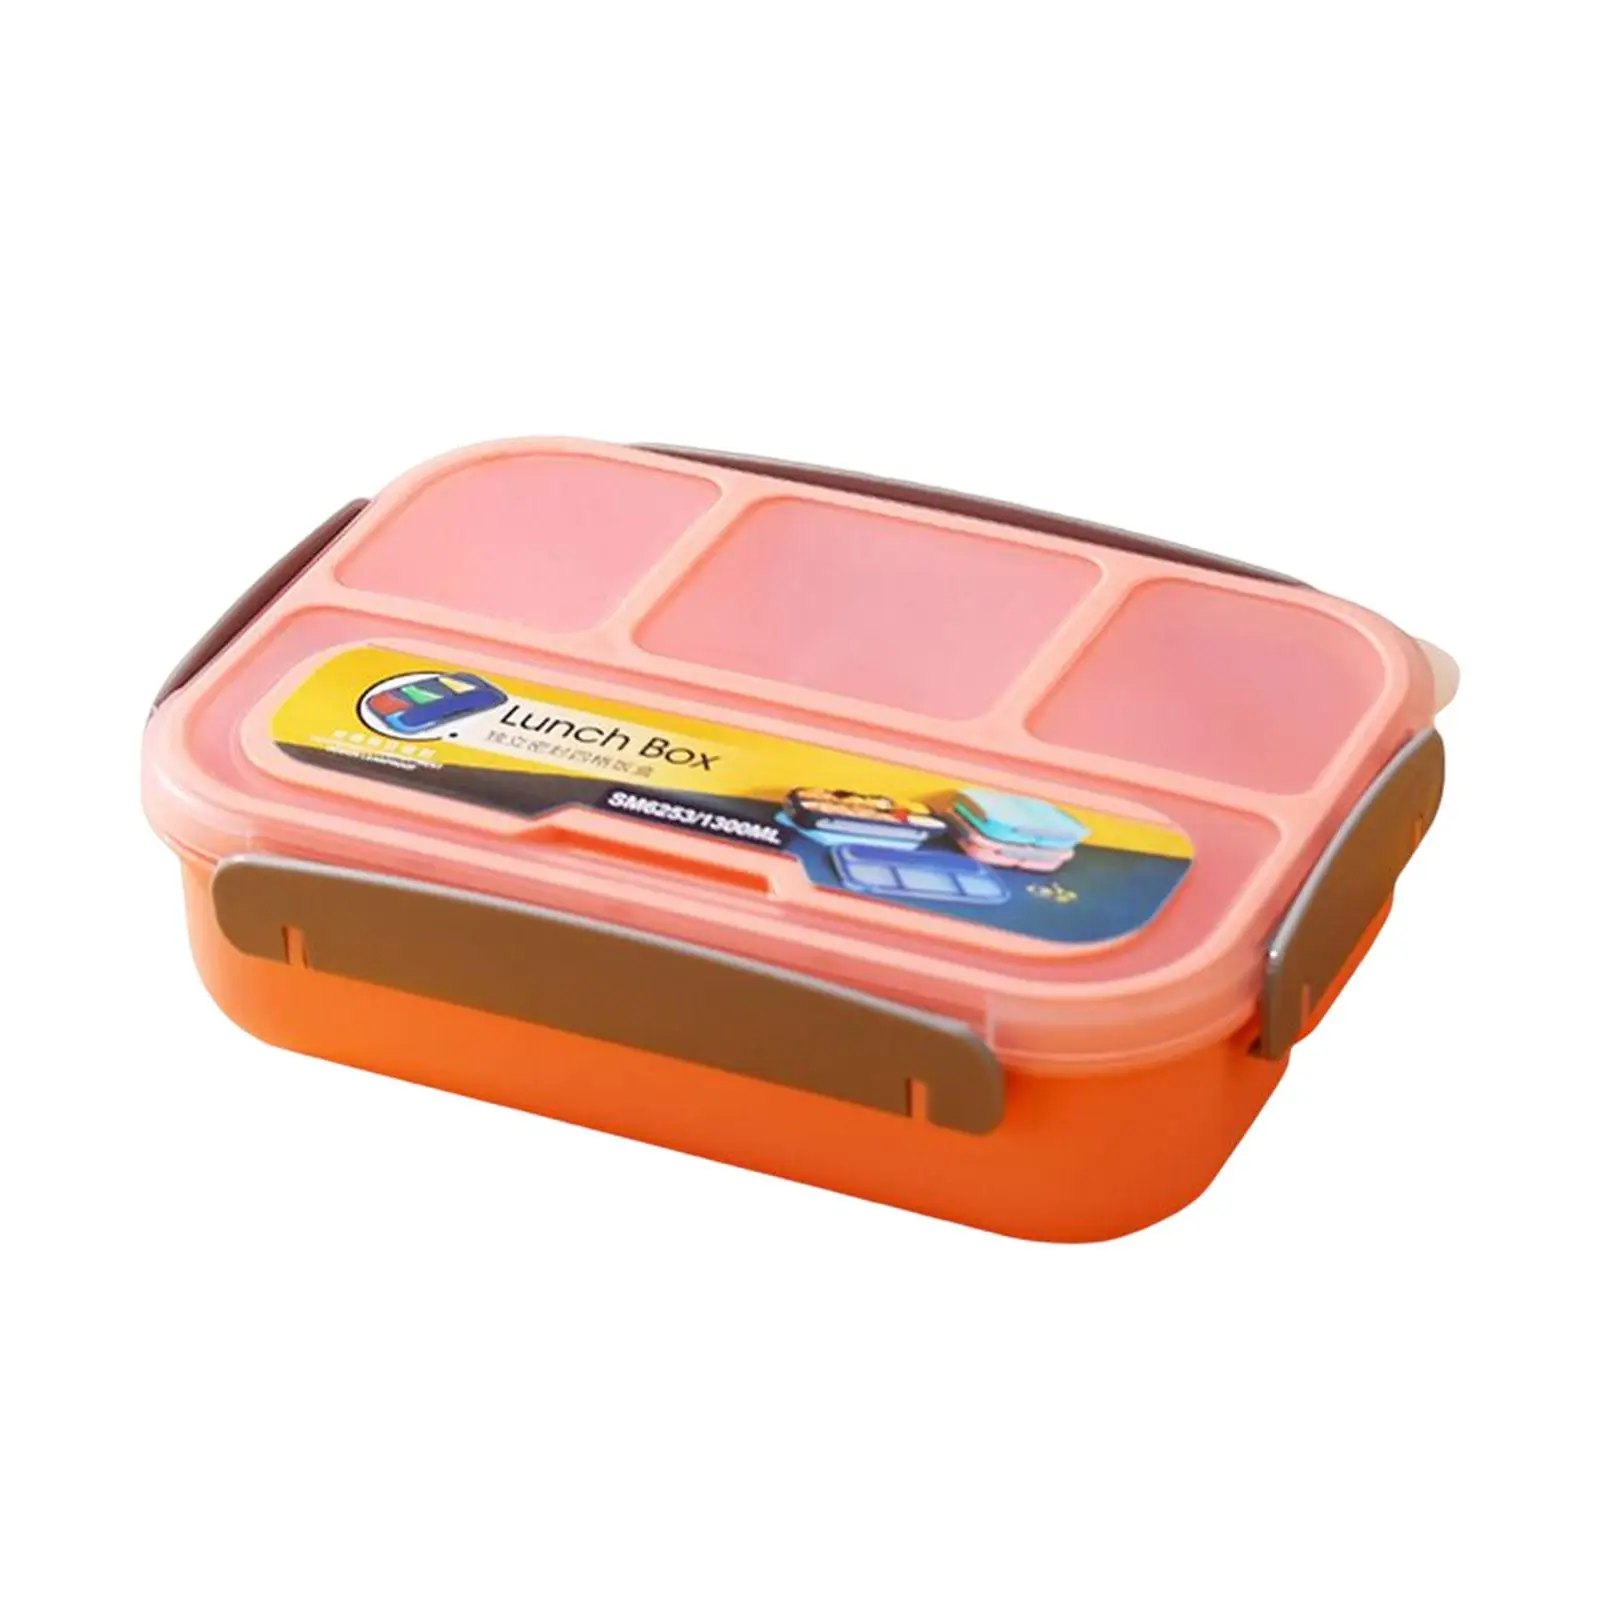 Lunch Box Container Bento Lunch Box Fruits Storage Box Lunch Container for Picnic Travel